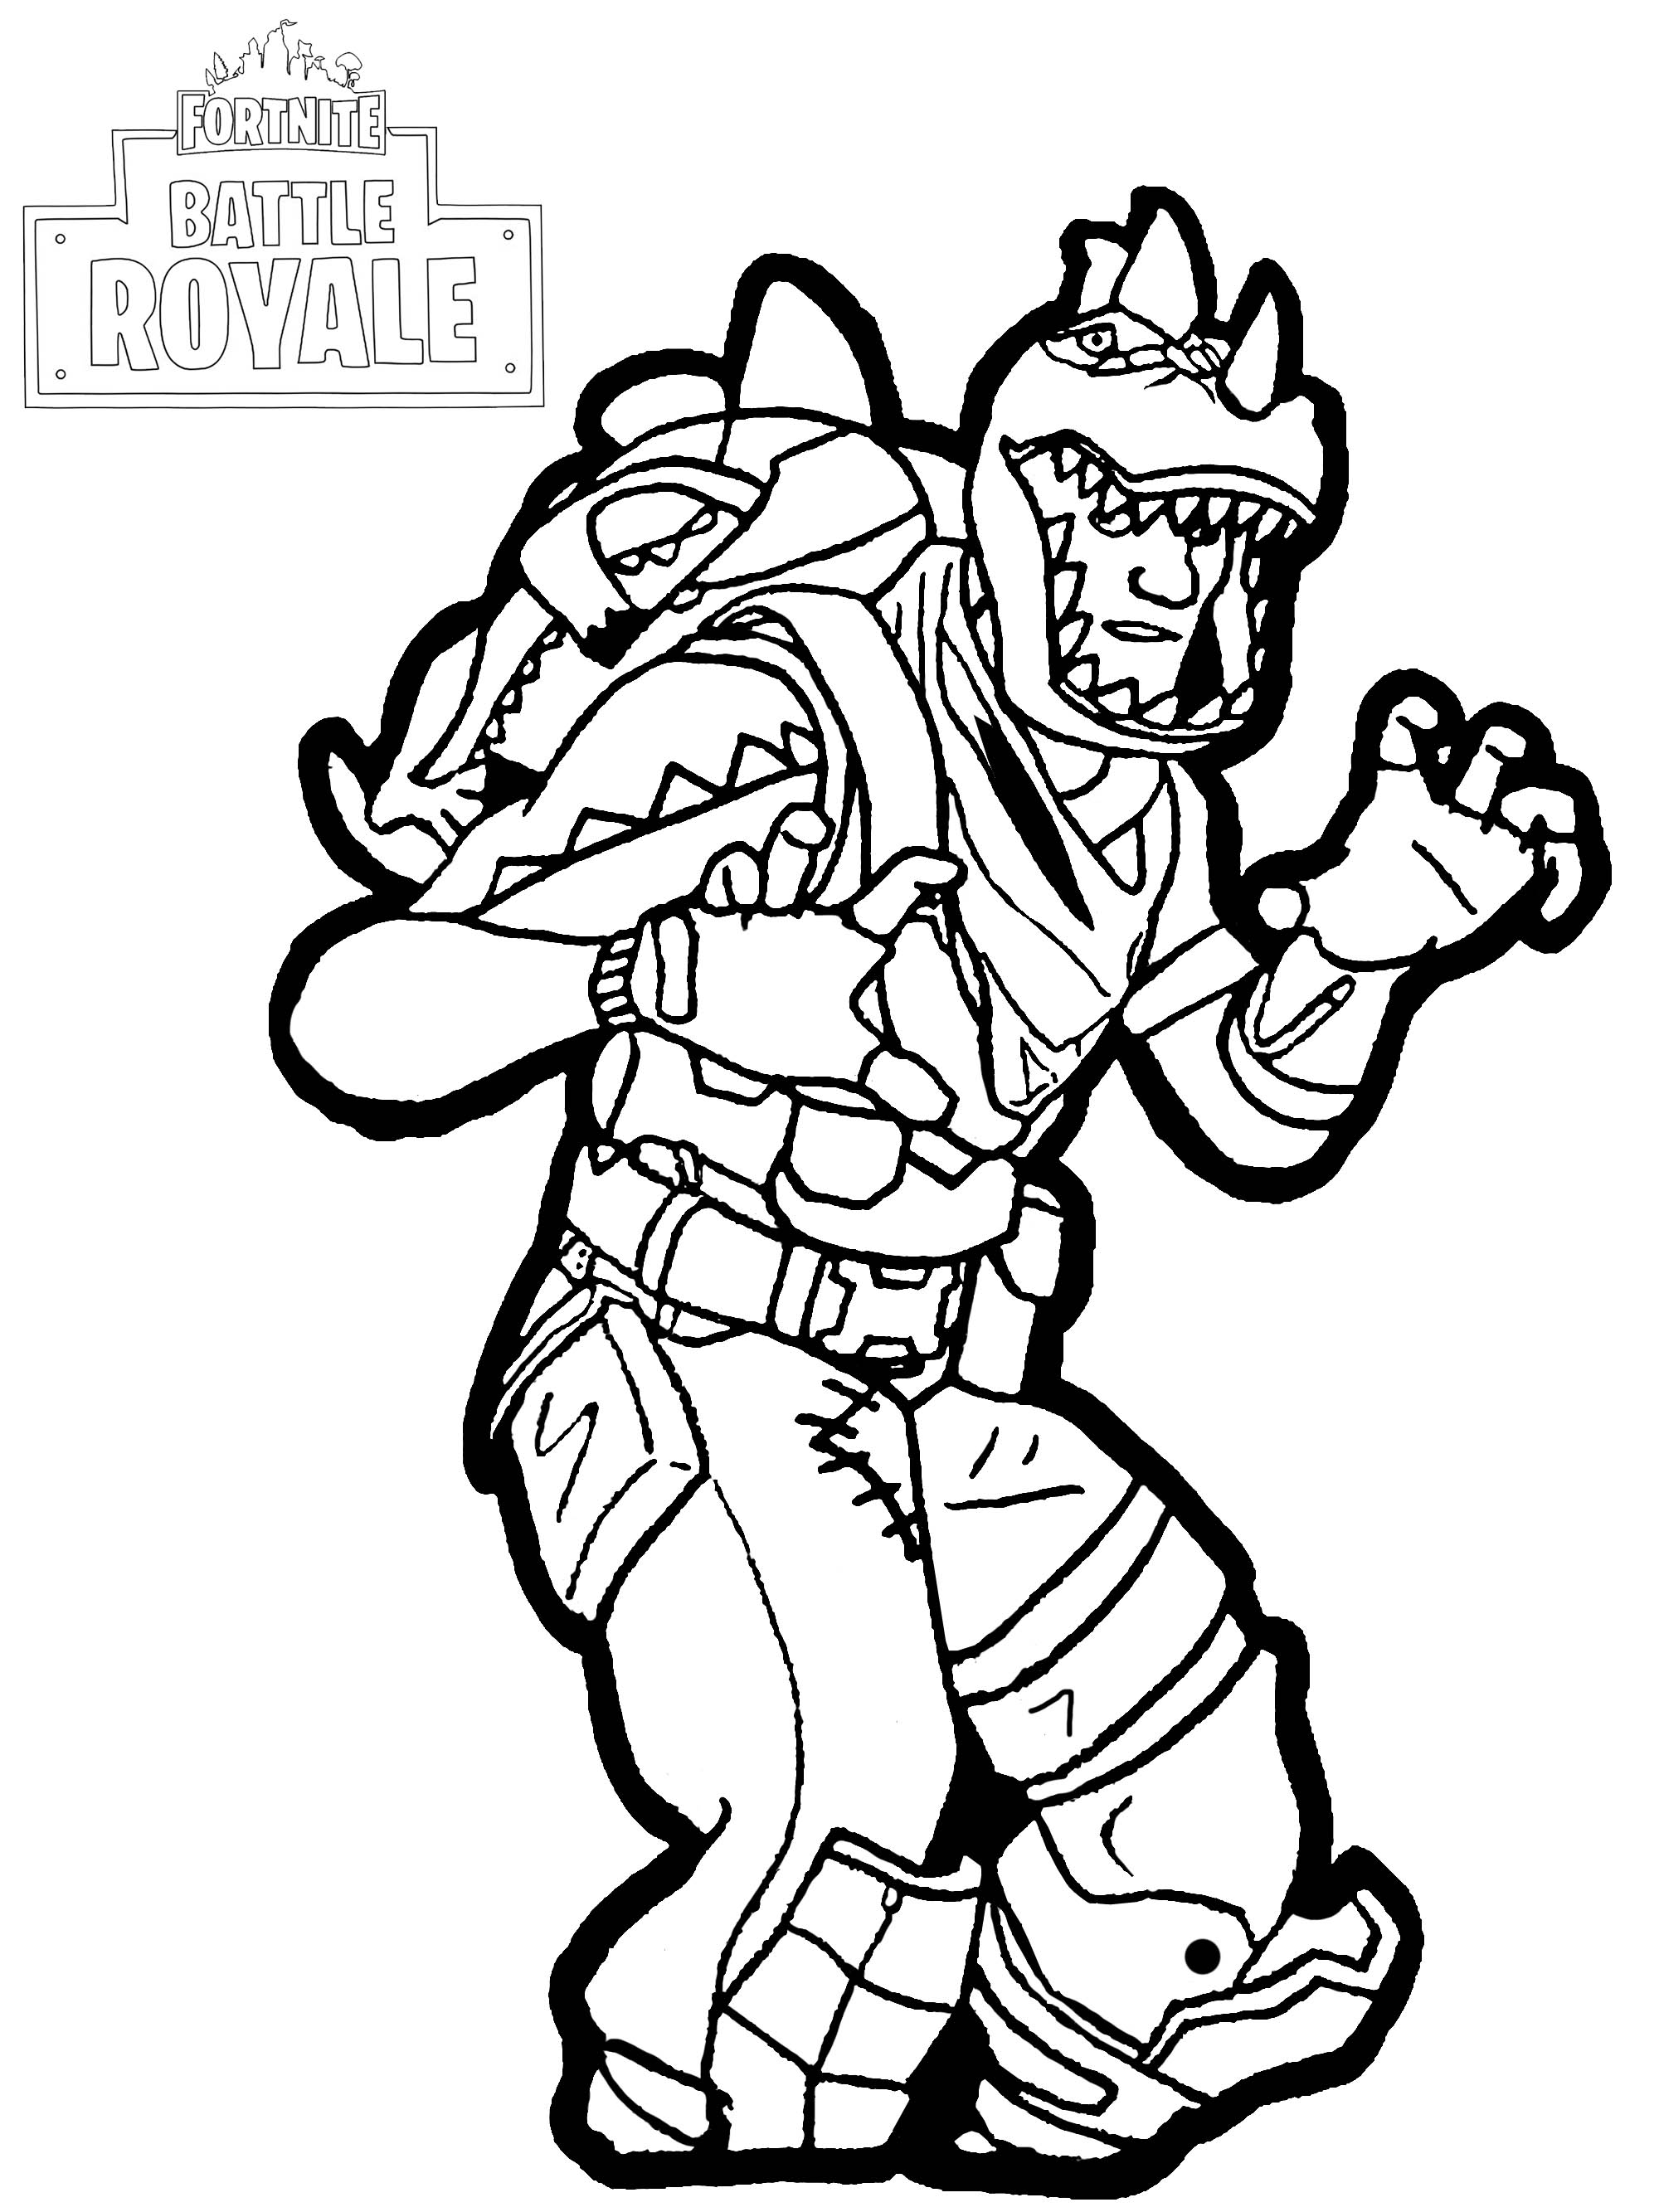 Legendary costume for the Fortnite : Battle Royale game (Dino Guard Set). It's a funny costume of a green dinosaur with orange bandana.  exclusive 'fan-art' drawing.